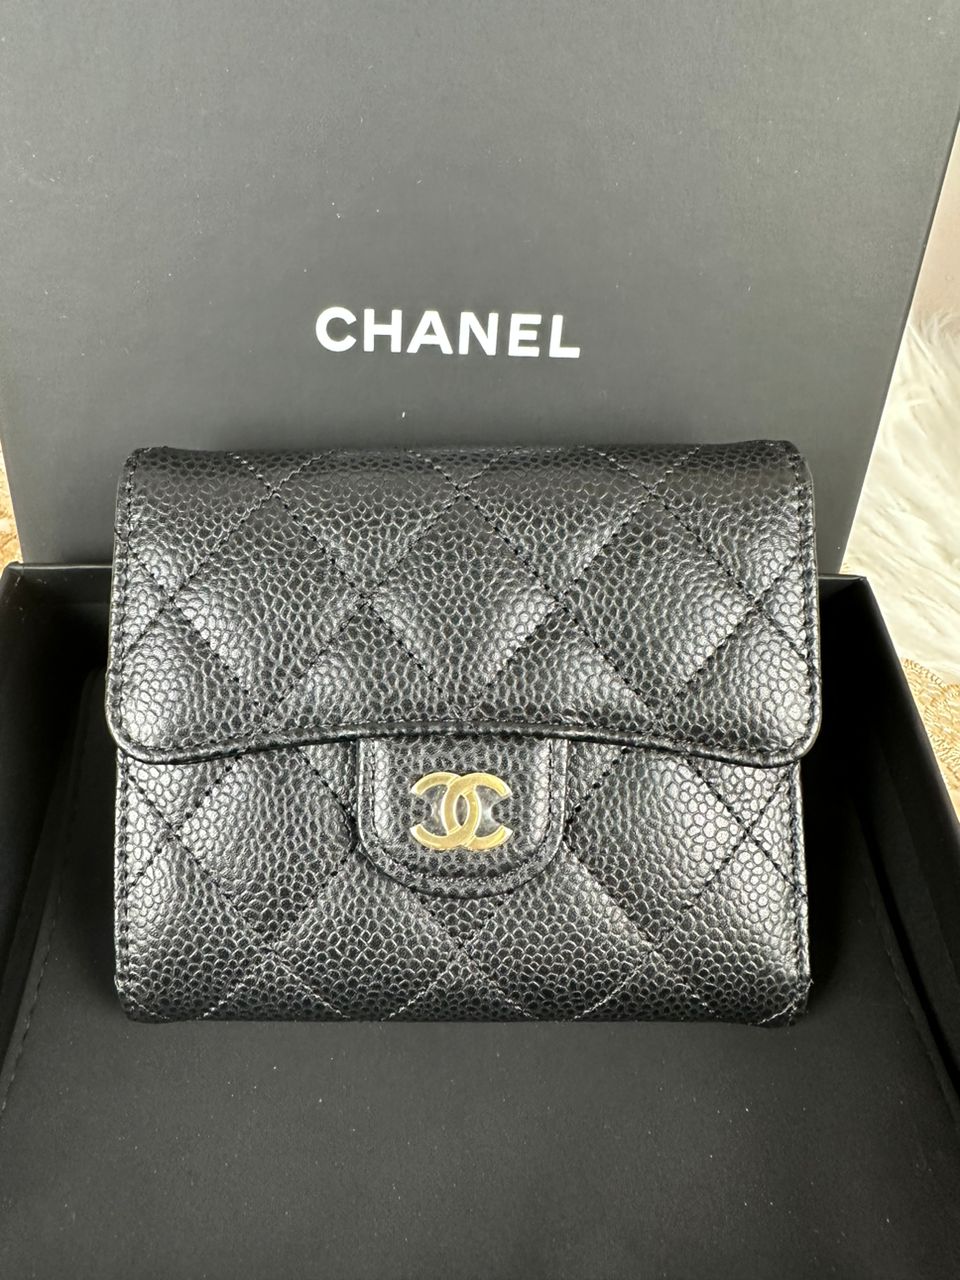 Chanel Classic Cardholder Review - Pros, Cons, and Is It Worth It